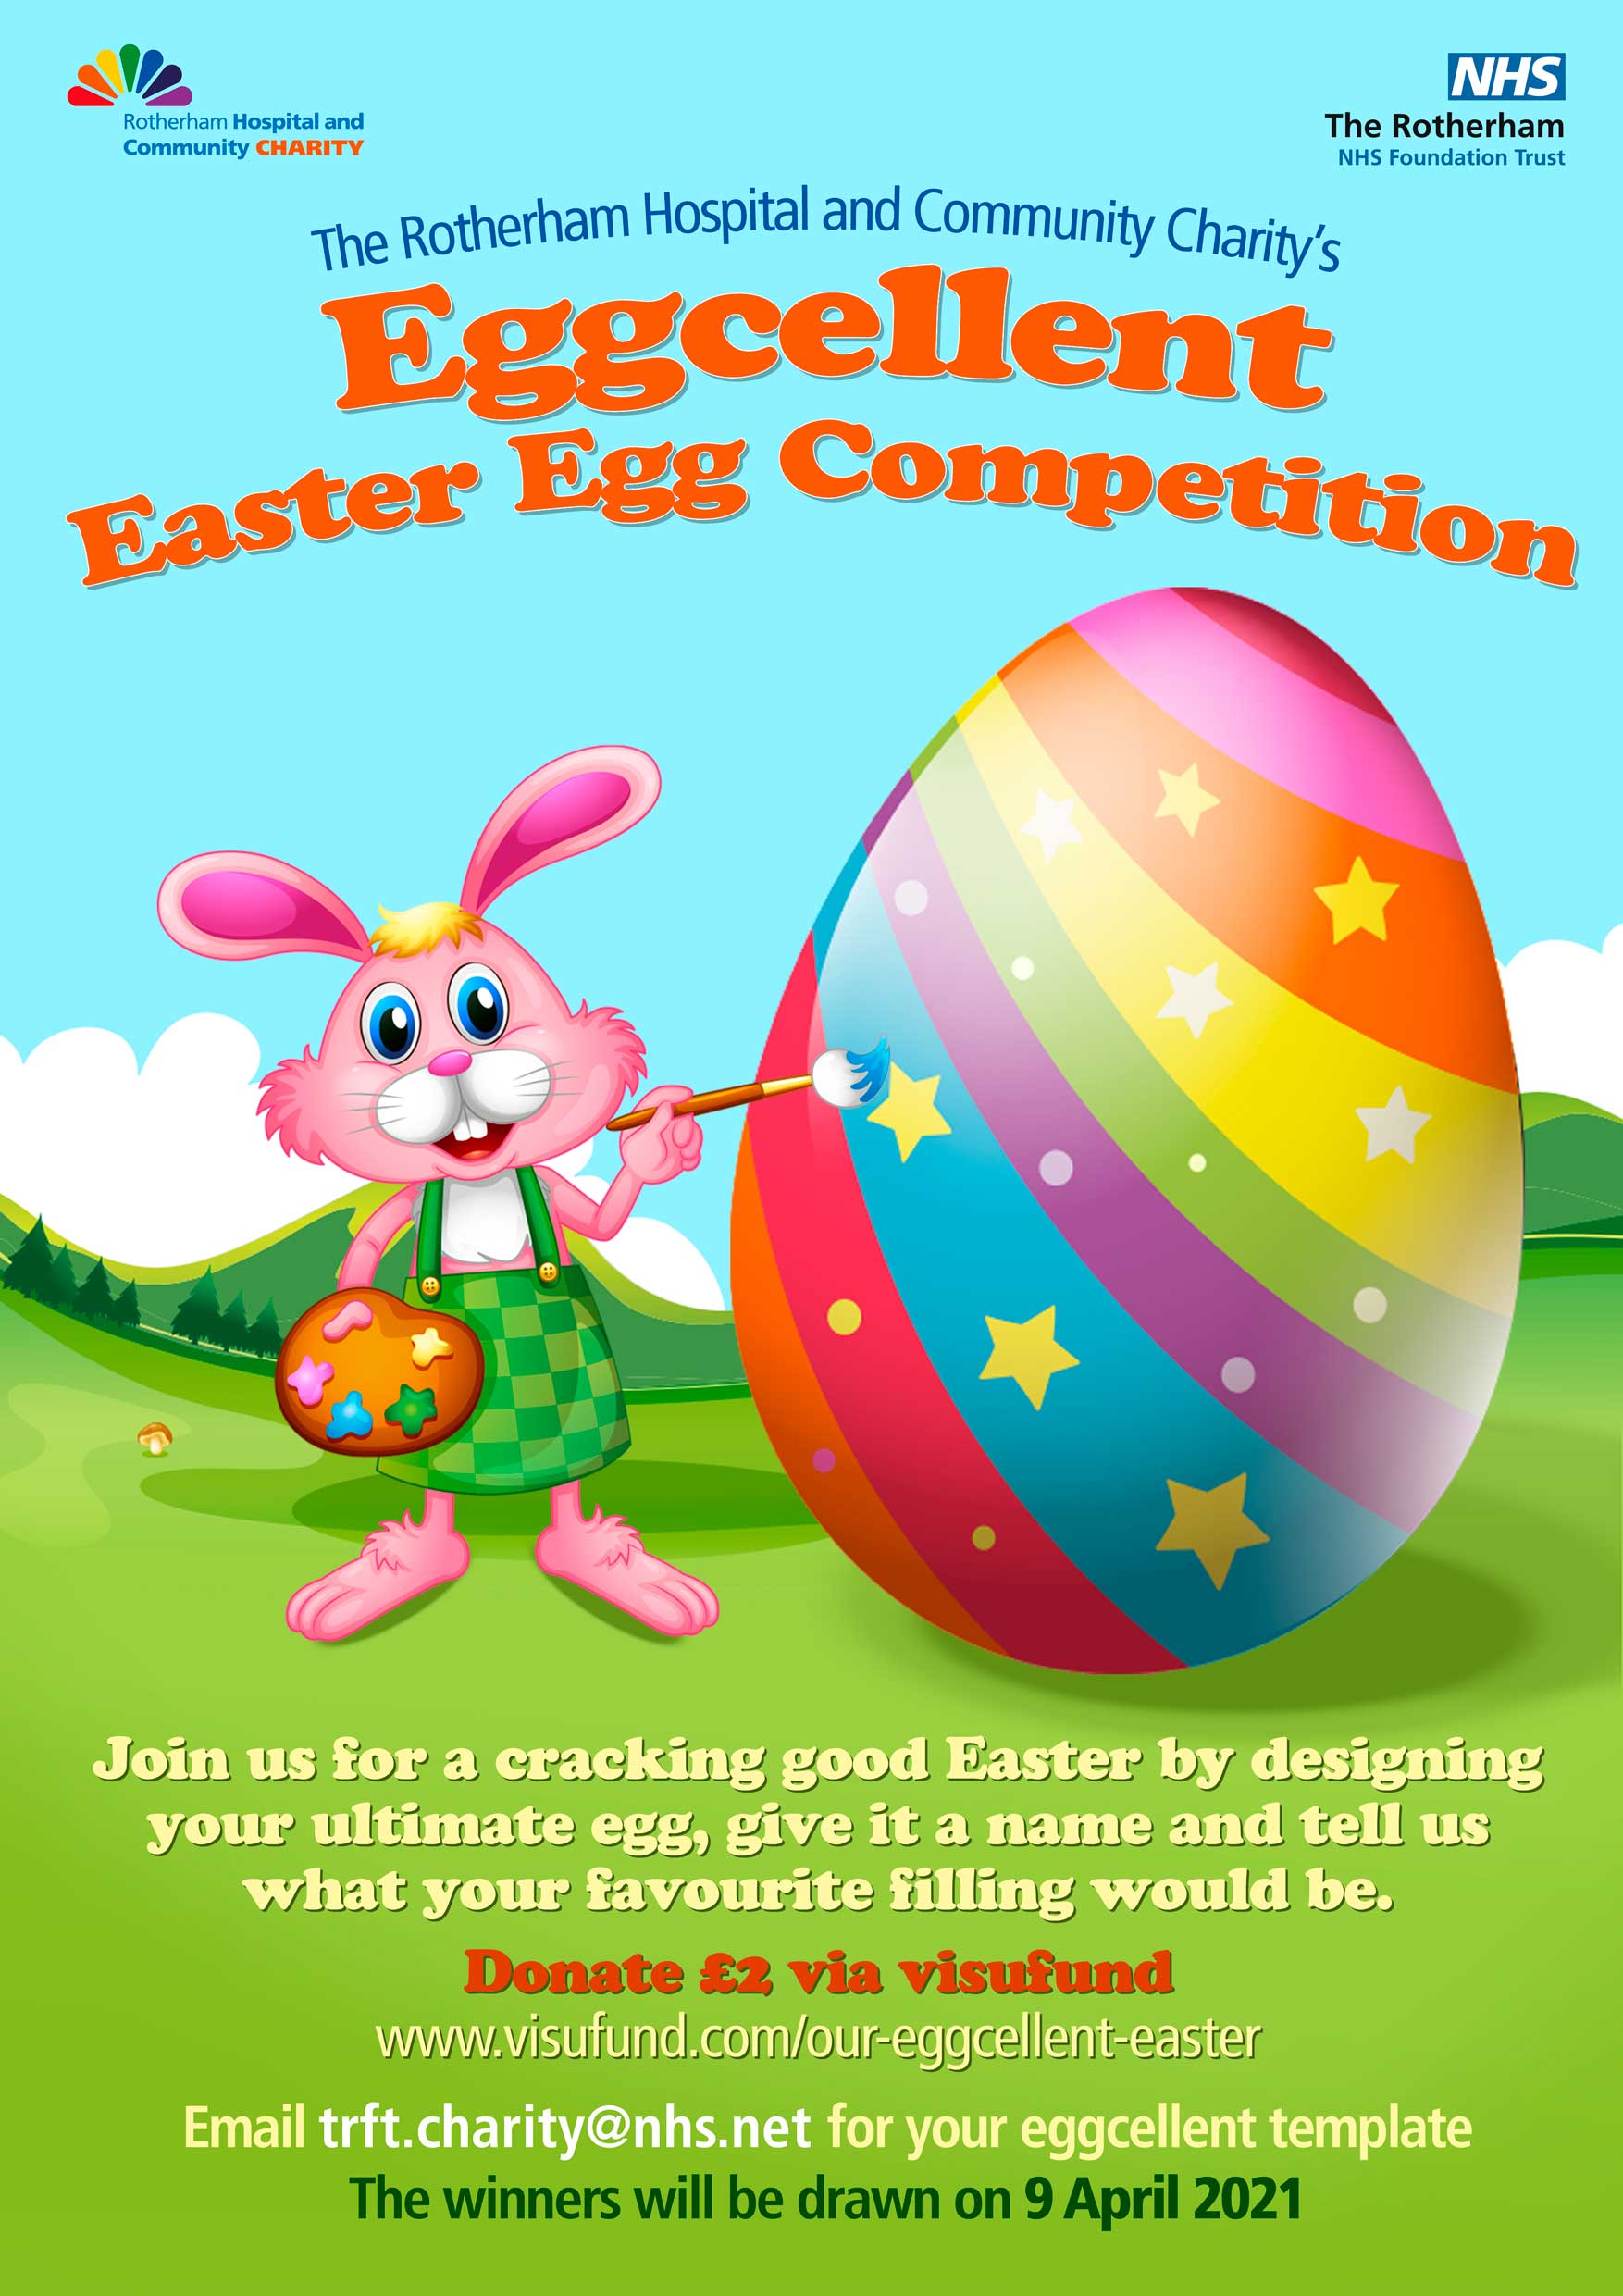 Good eggs sought for charity’s crafty Easter competition